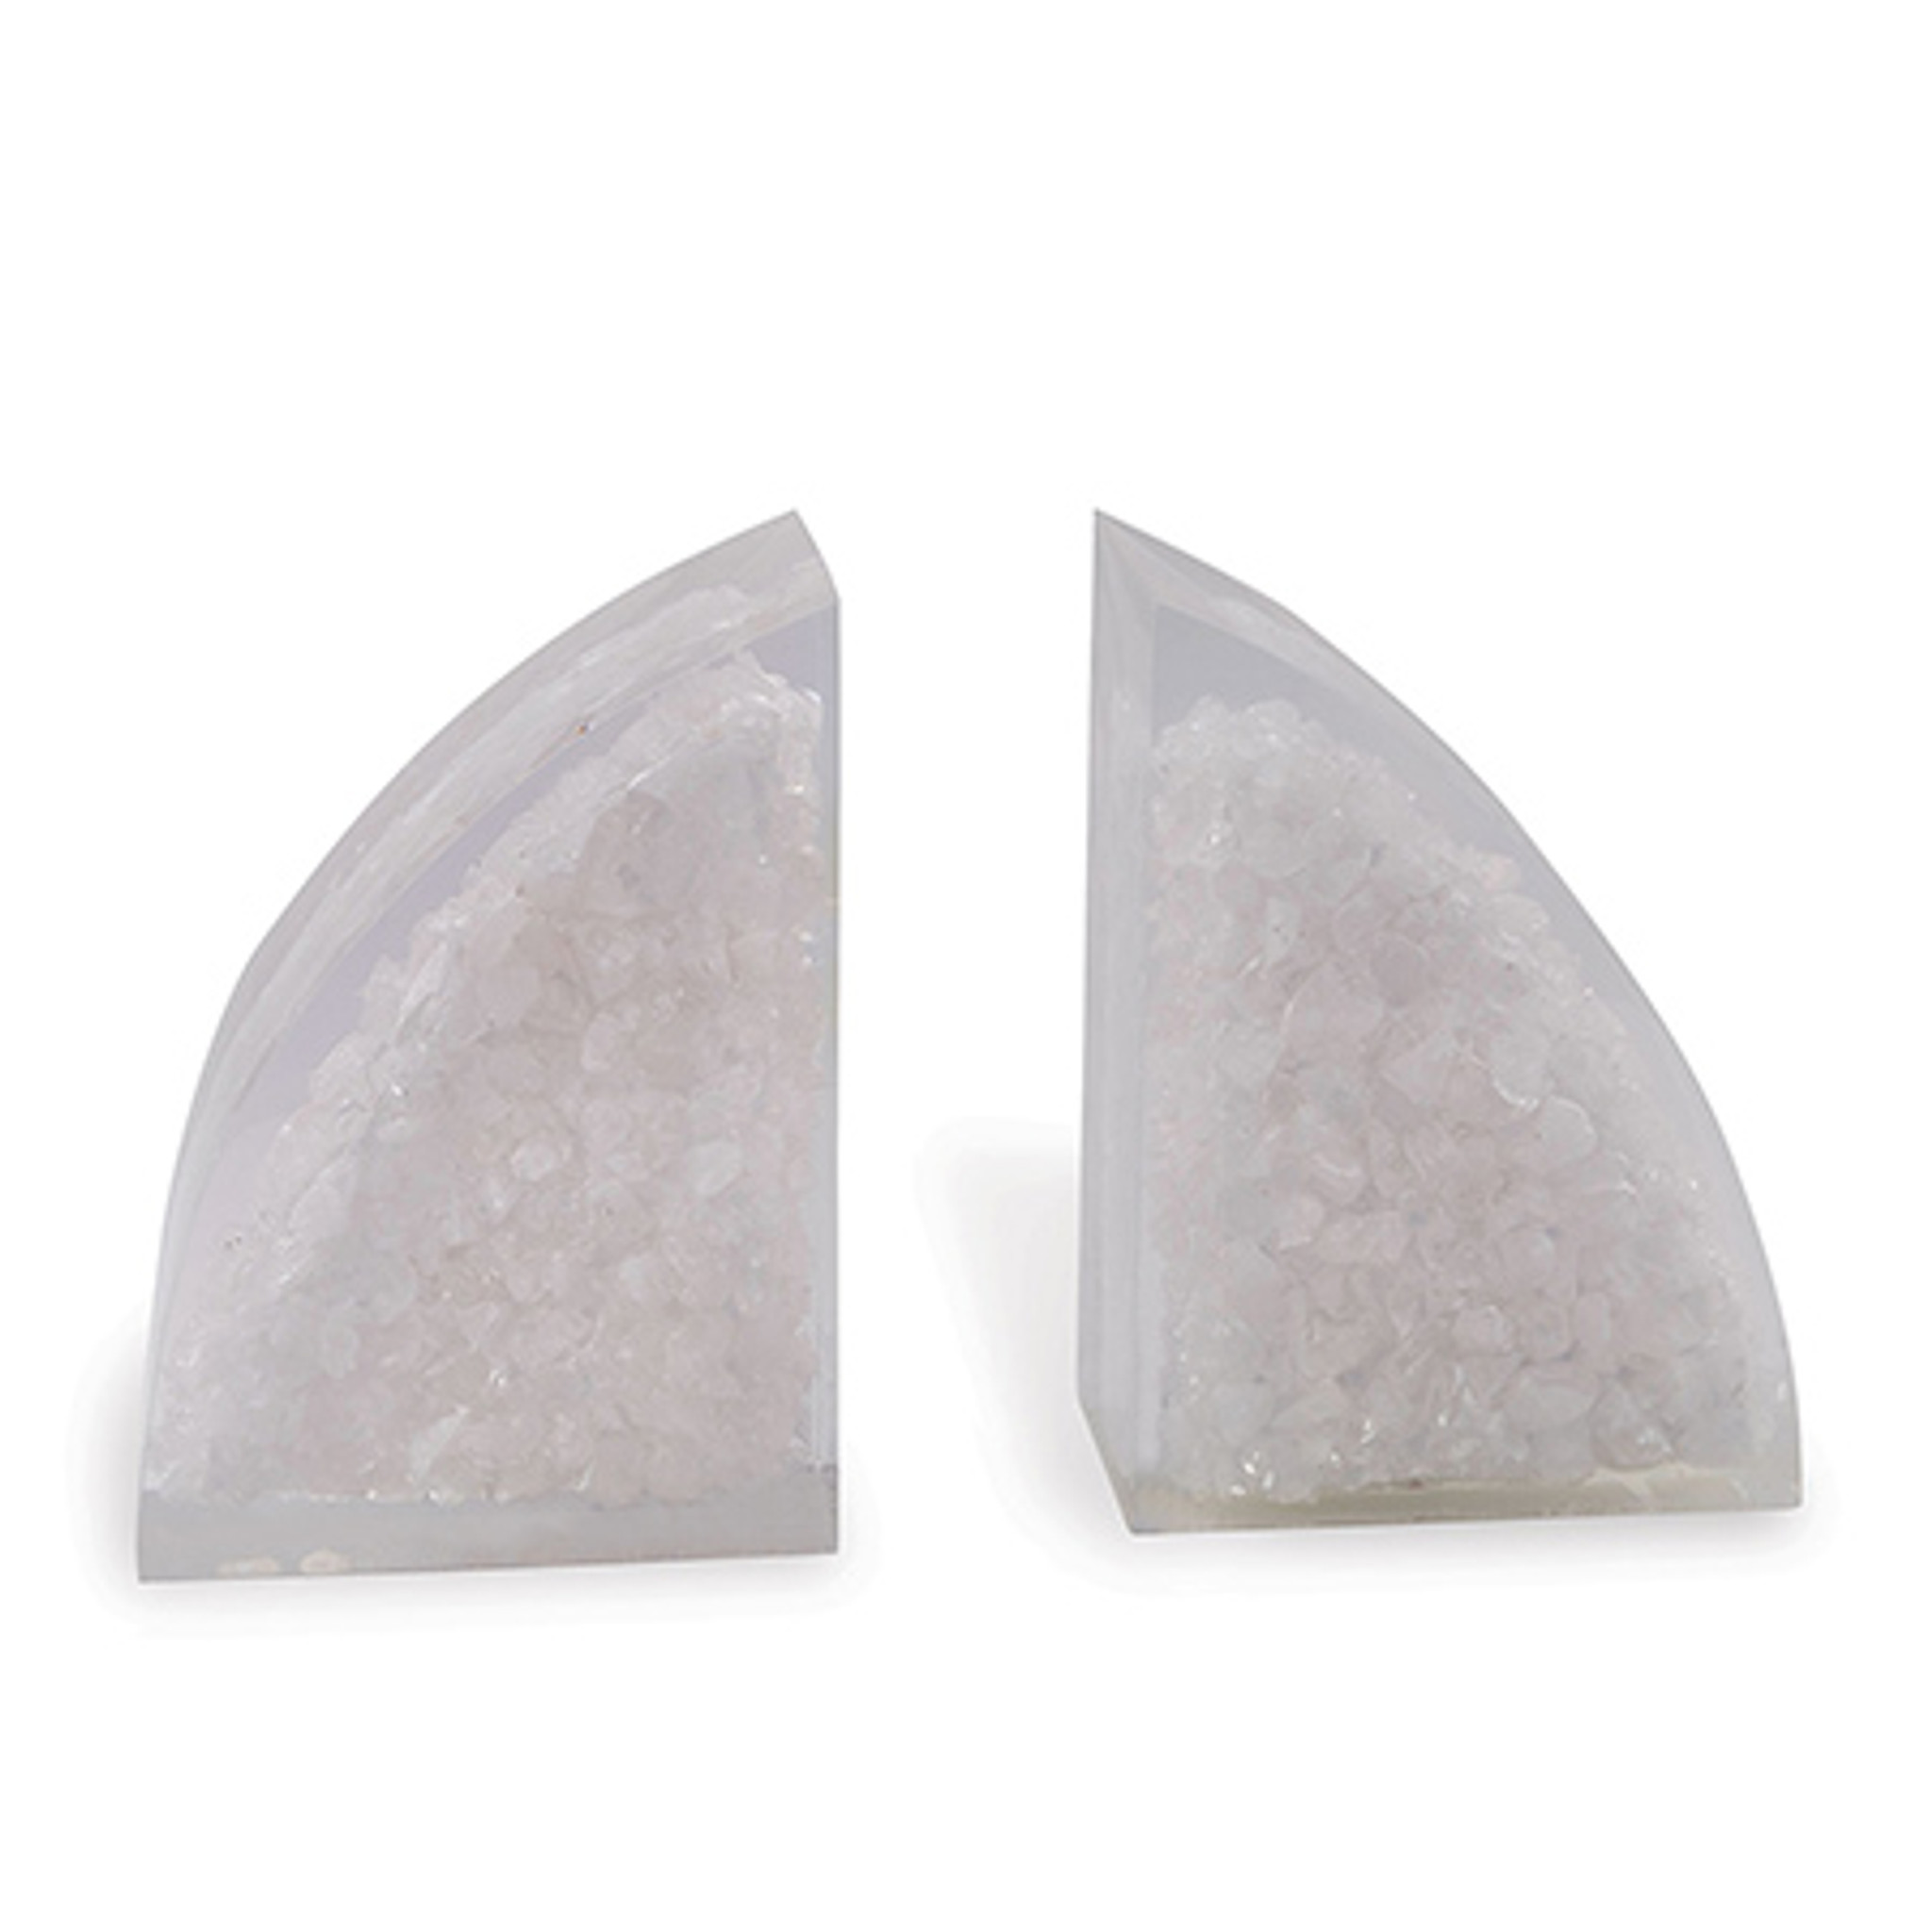  Quartz and Clear Resin Half Moon Bookends